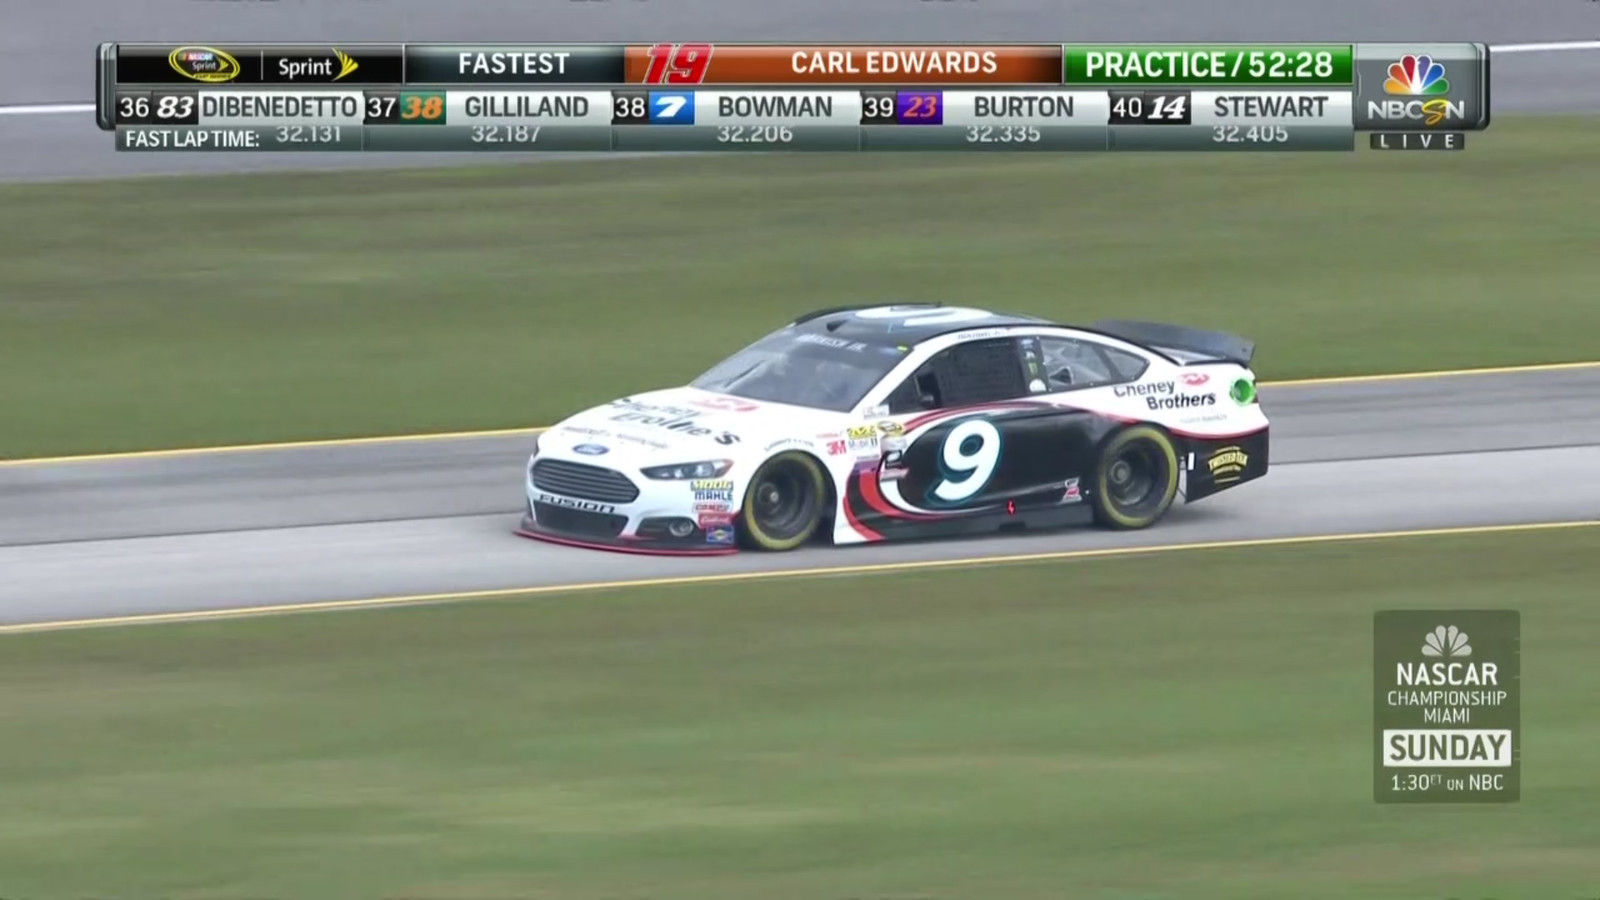 The #9 Cheney Brothers Ford Fusion coming on to pit road during a practice session for the Ford 400 as seen live during an NBCSN broadcast feed from Homestead-Miami Speedway on November 20th, 2015